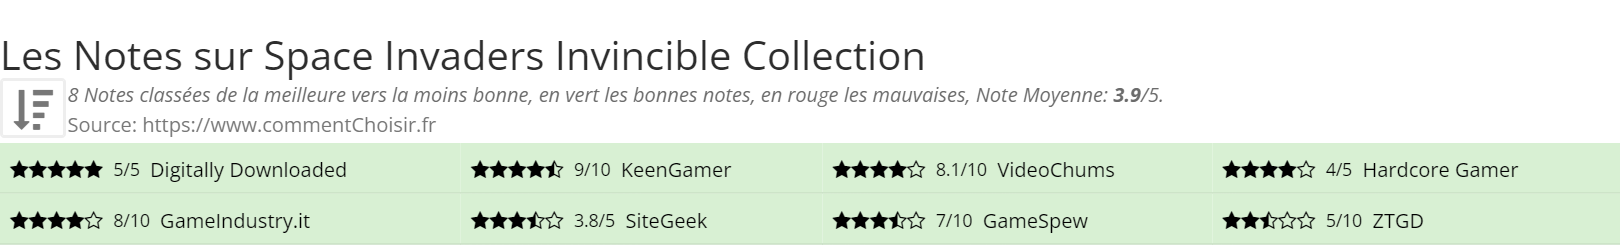 Ratings Space Invaders Invincible Collection